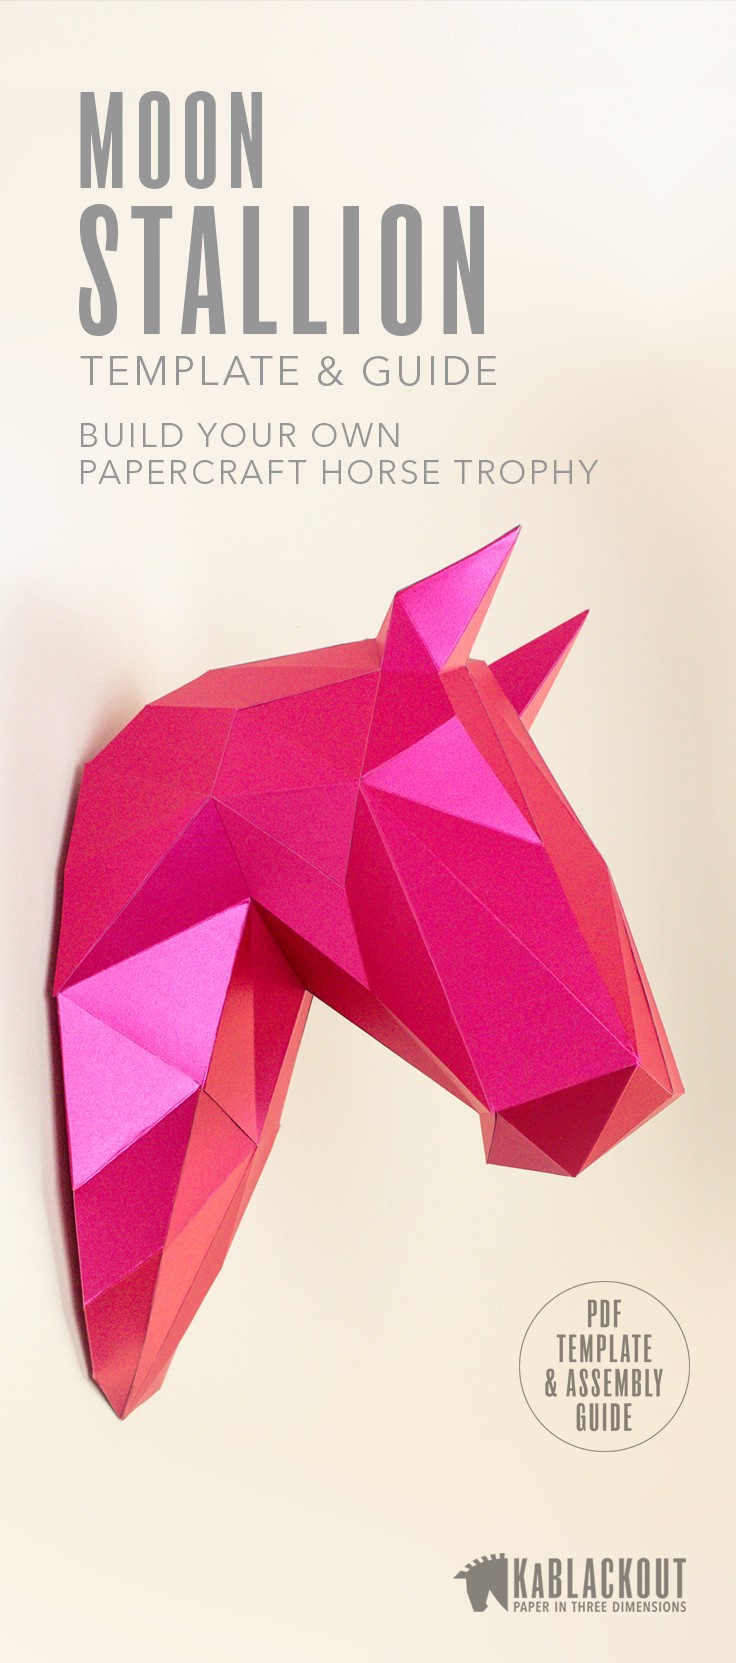 Unicorn Papercraft Horse Papercraft Diy Horse Template Low Poly Horse 3d Wall Trophy